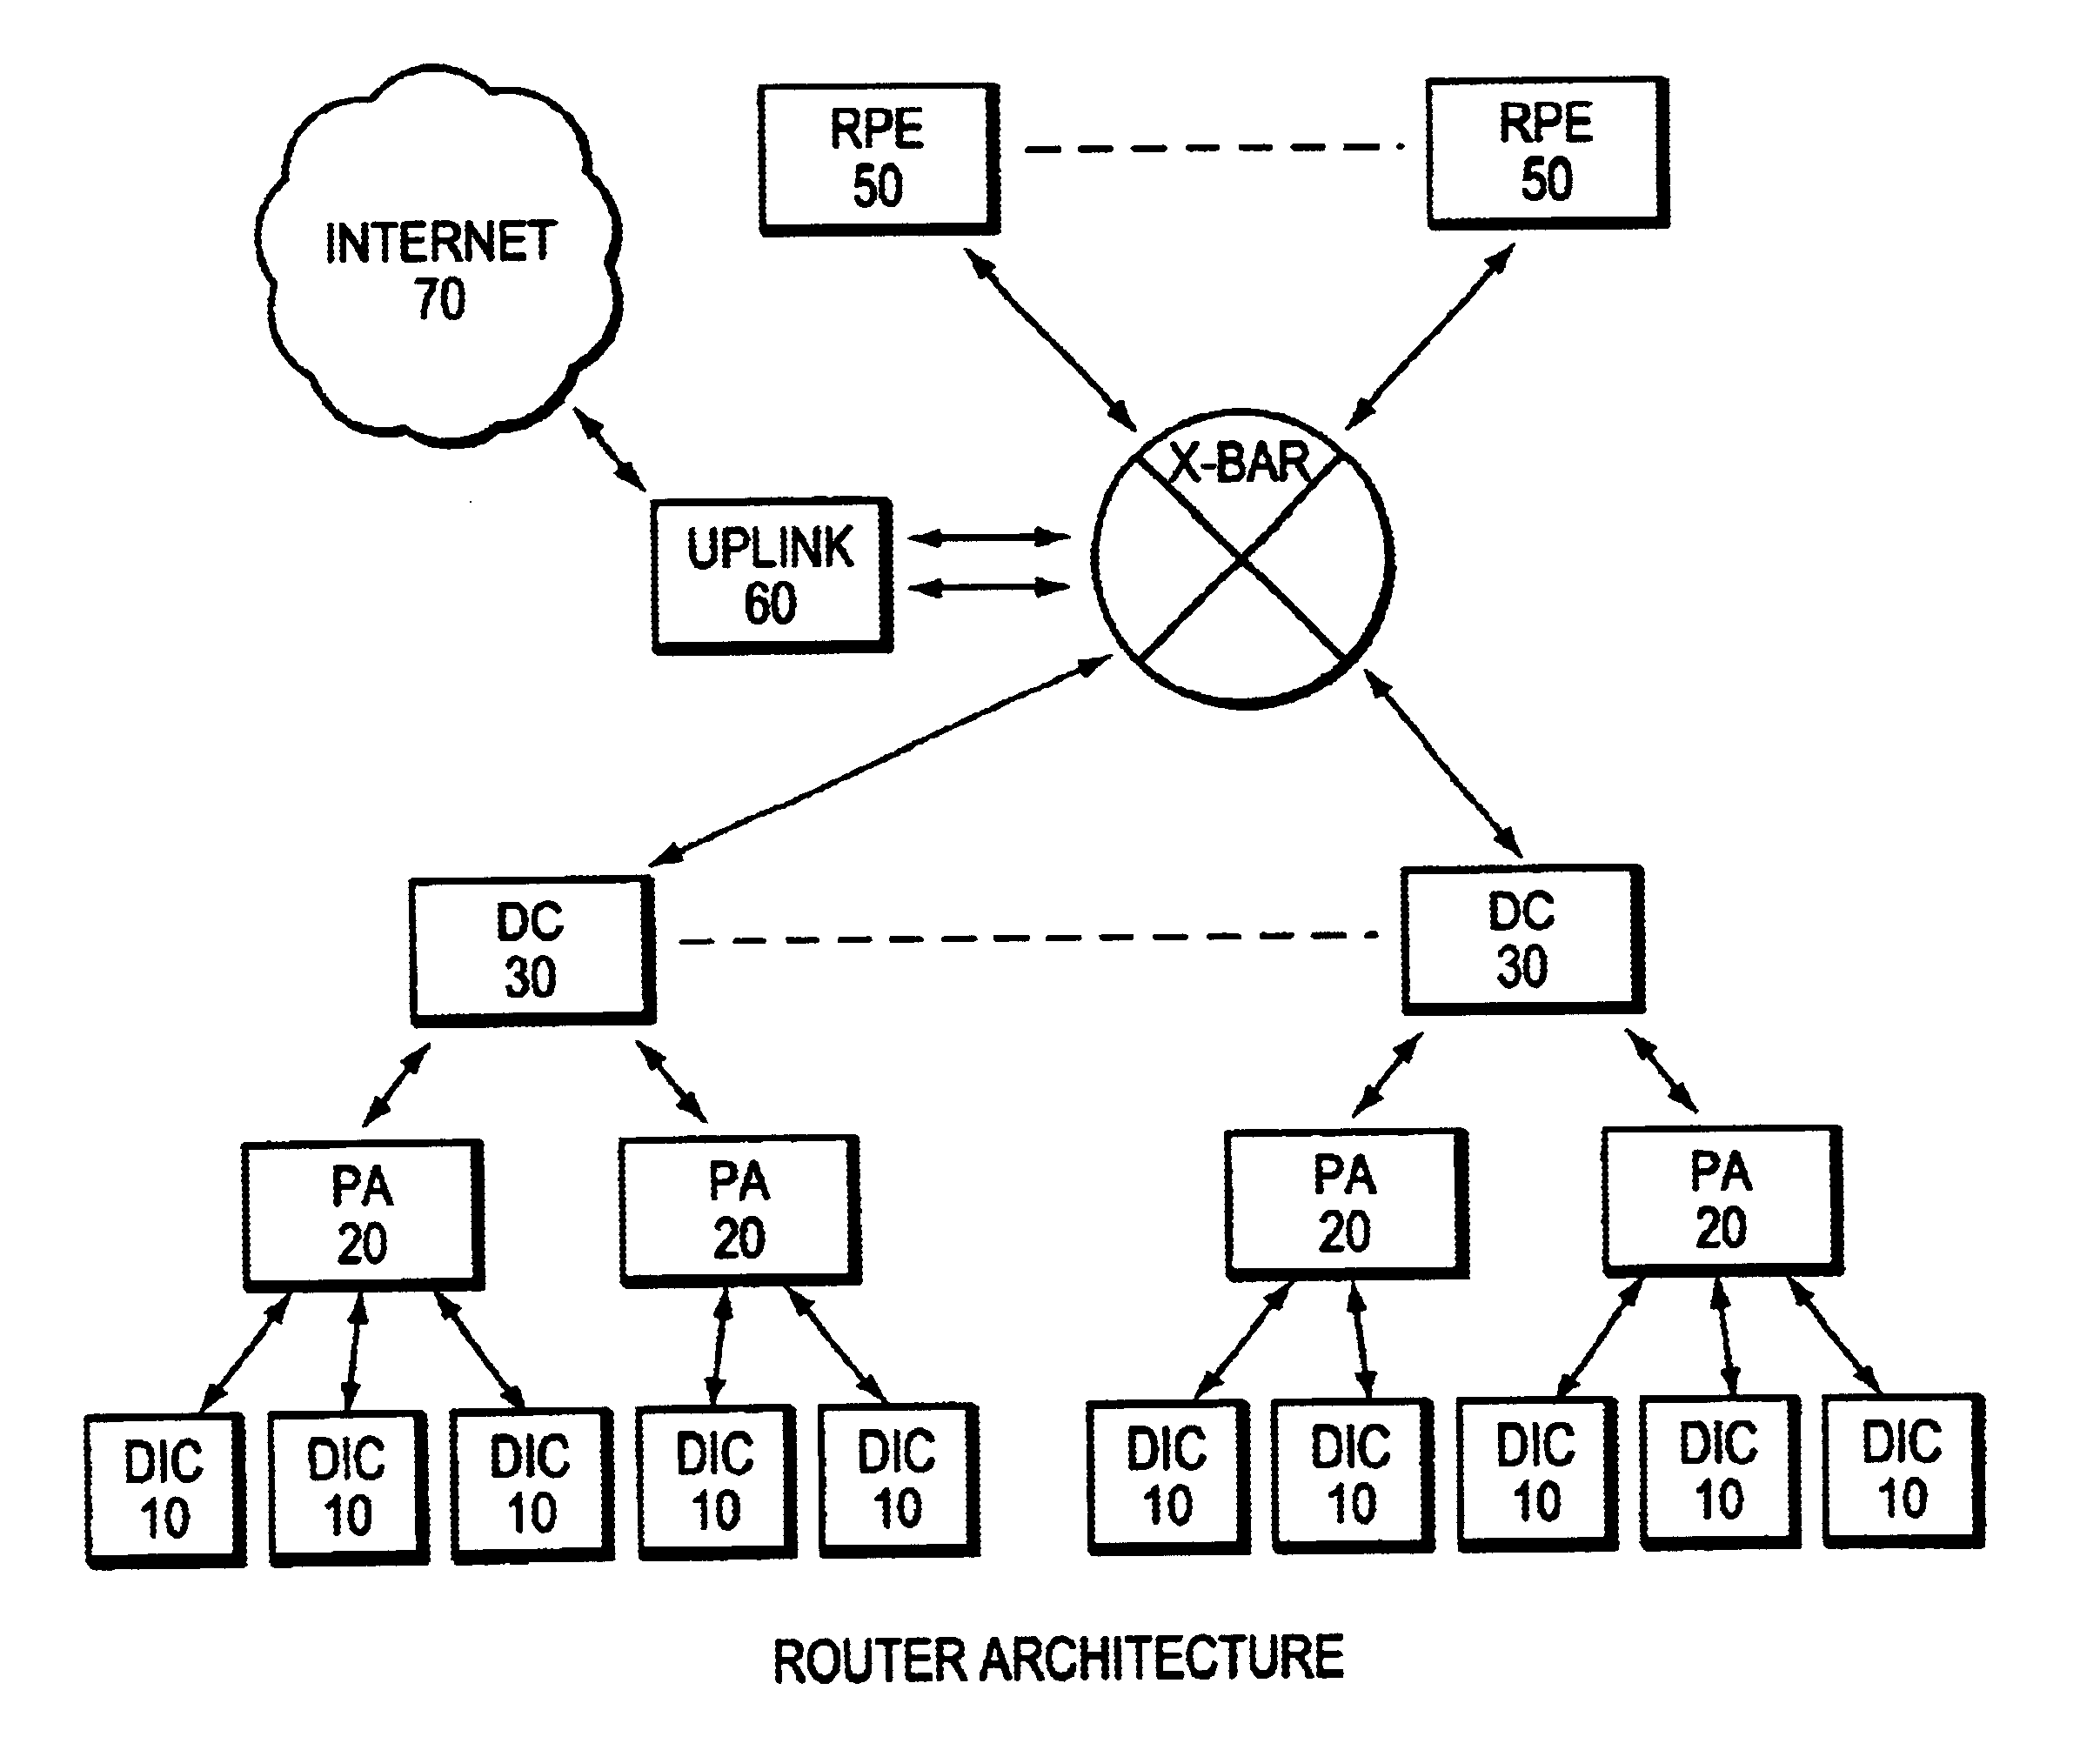 Route/service processor scalability via flow-based distribution of traffic